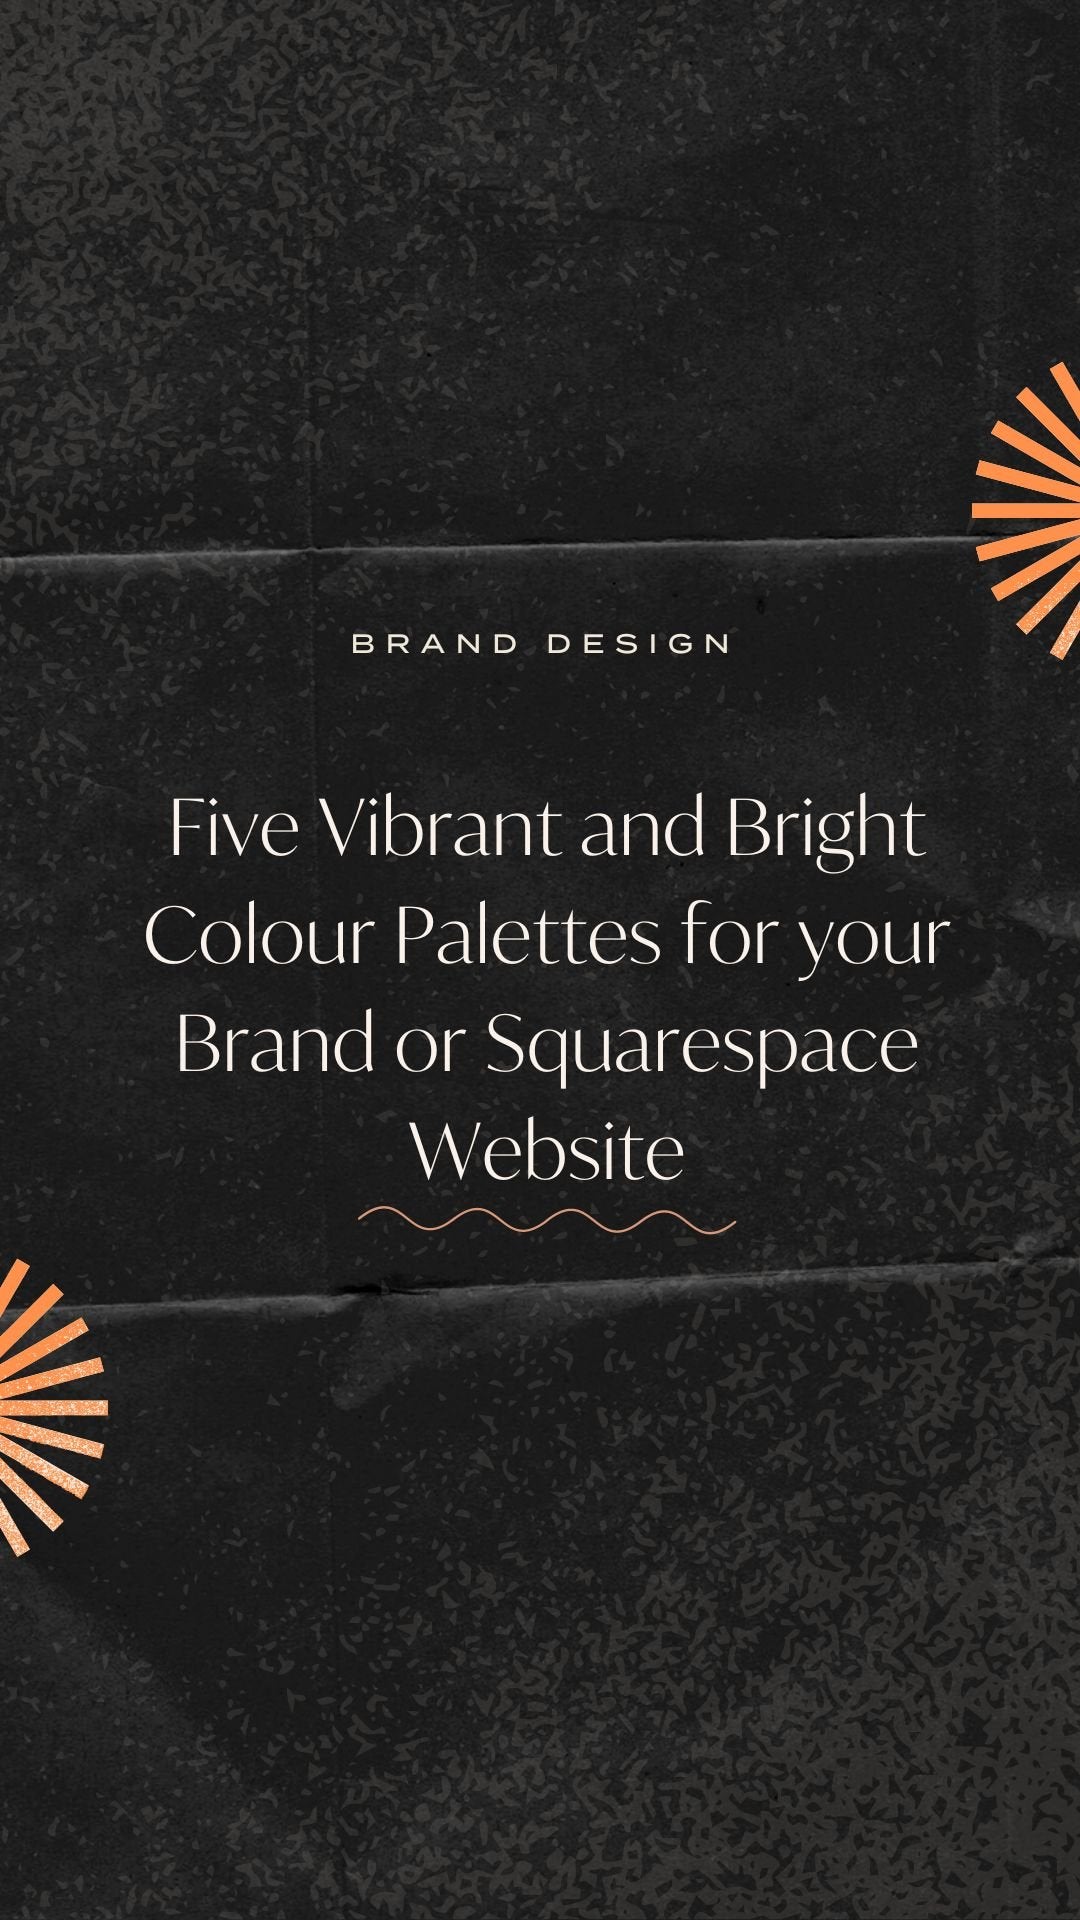 Five Vibrant and Bright Colour Palettes for your Brand or Squarespace Website